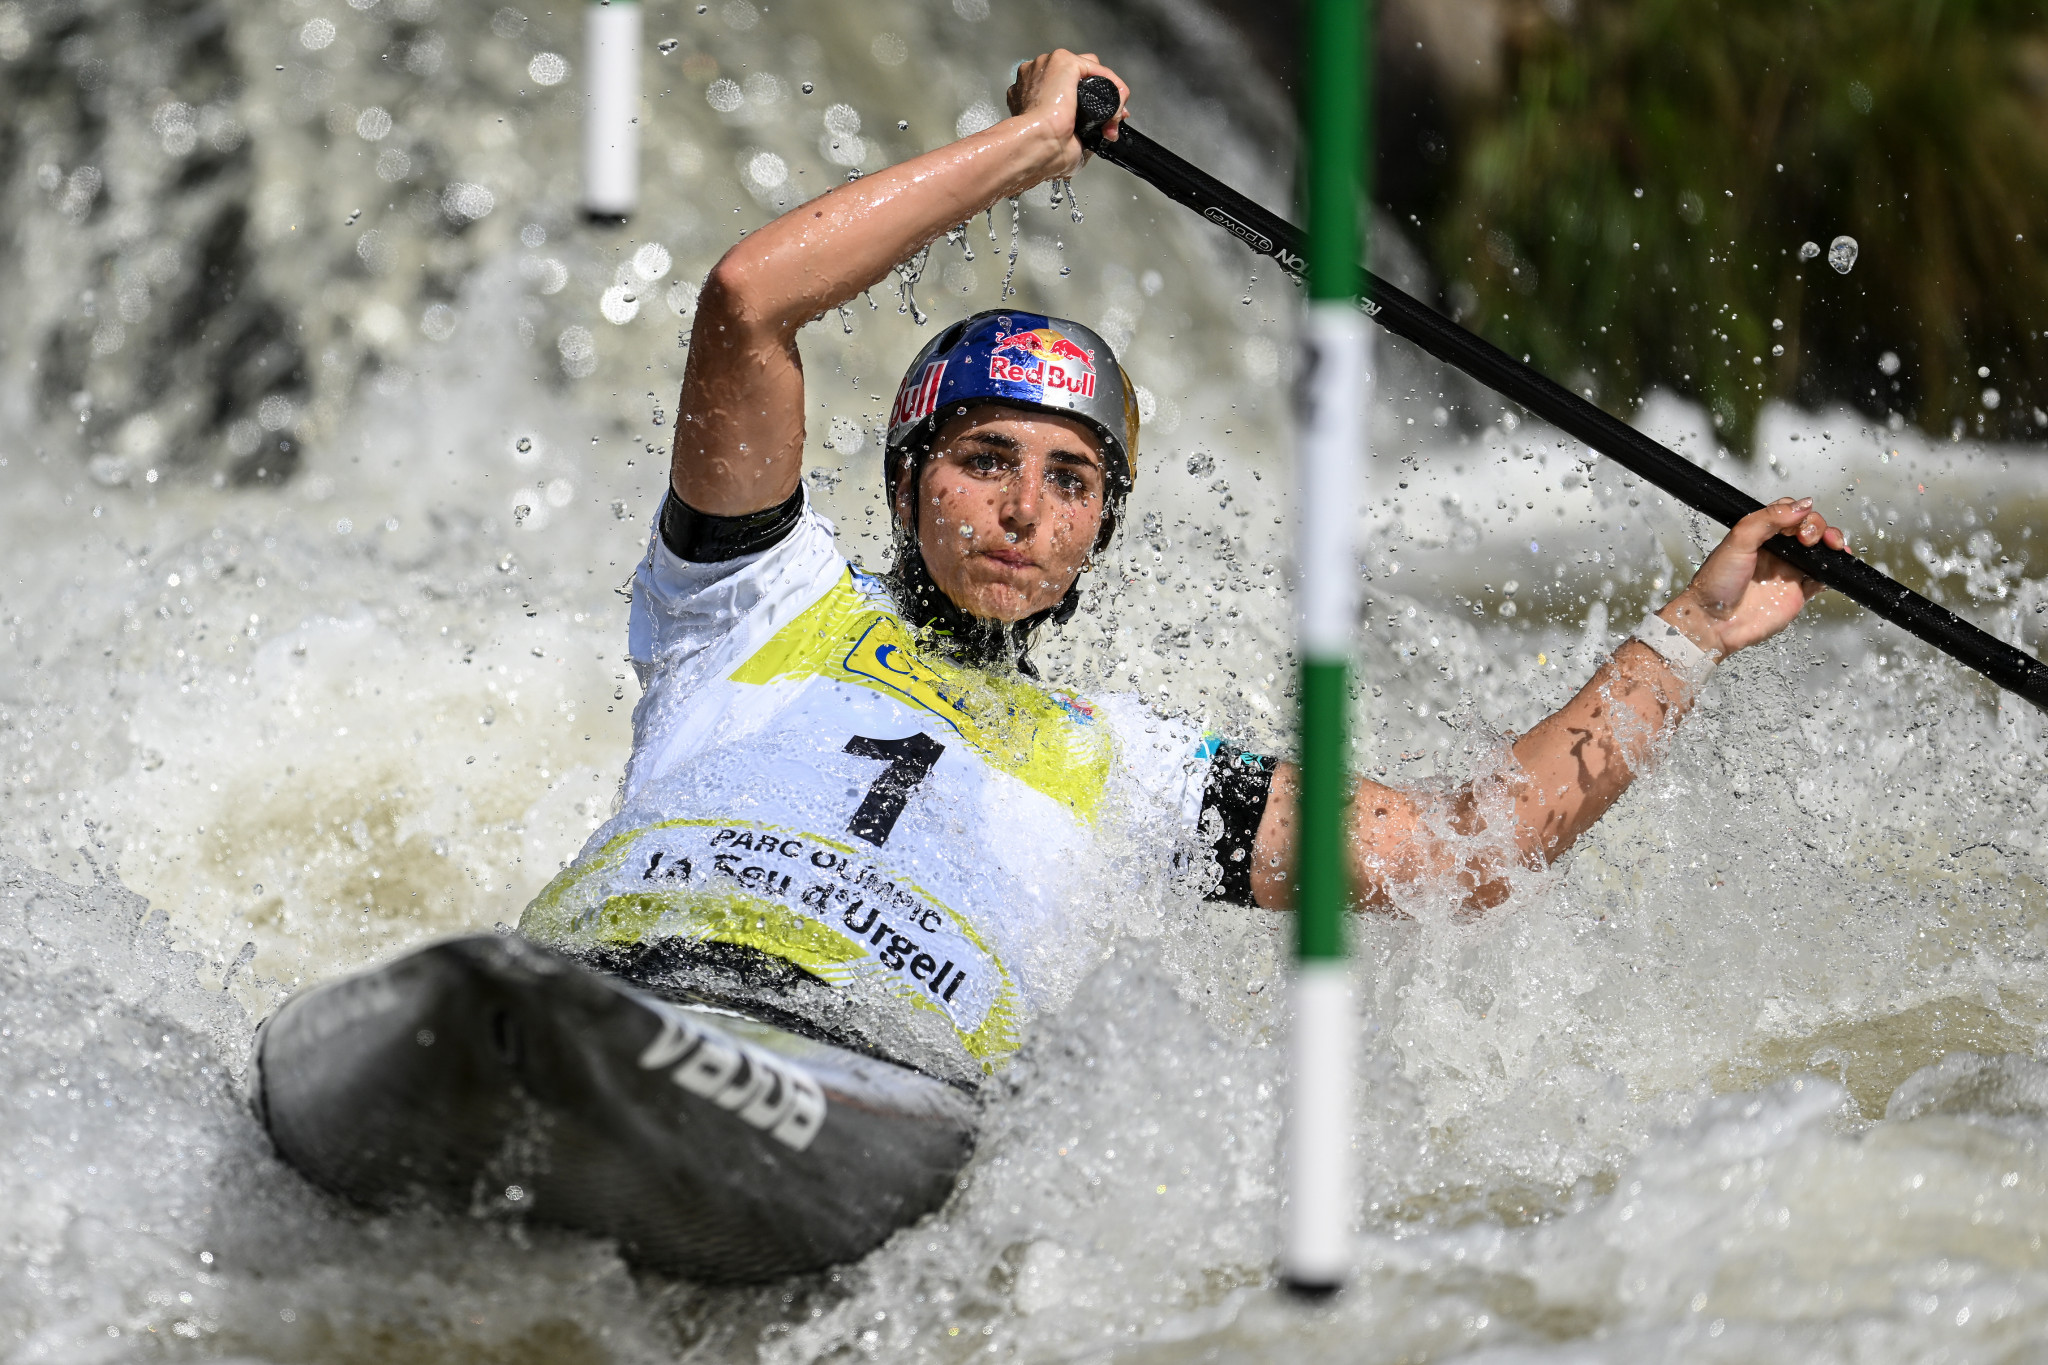 Olympic gold medallist Jess Fox of Australia has won 12 gold medals in Canoe Slalom World Championships ©Getty Images